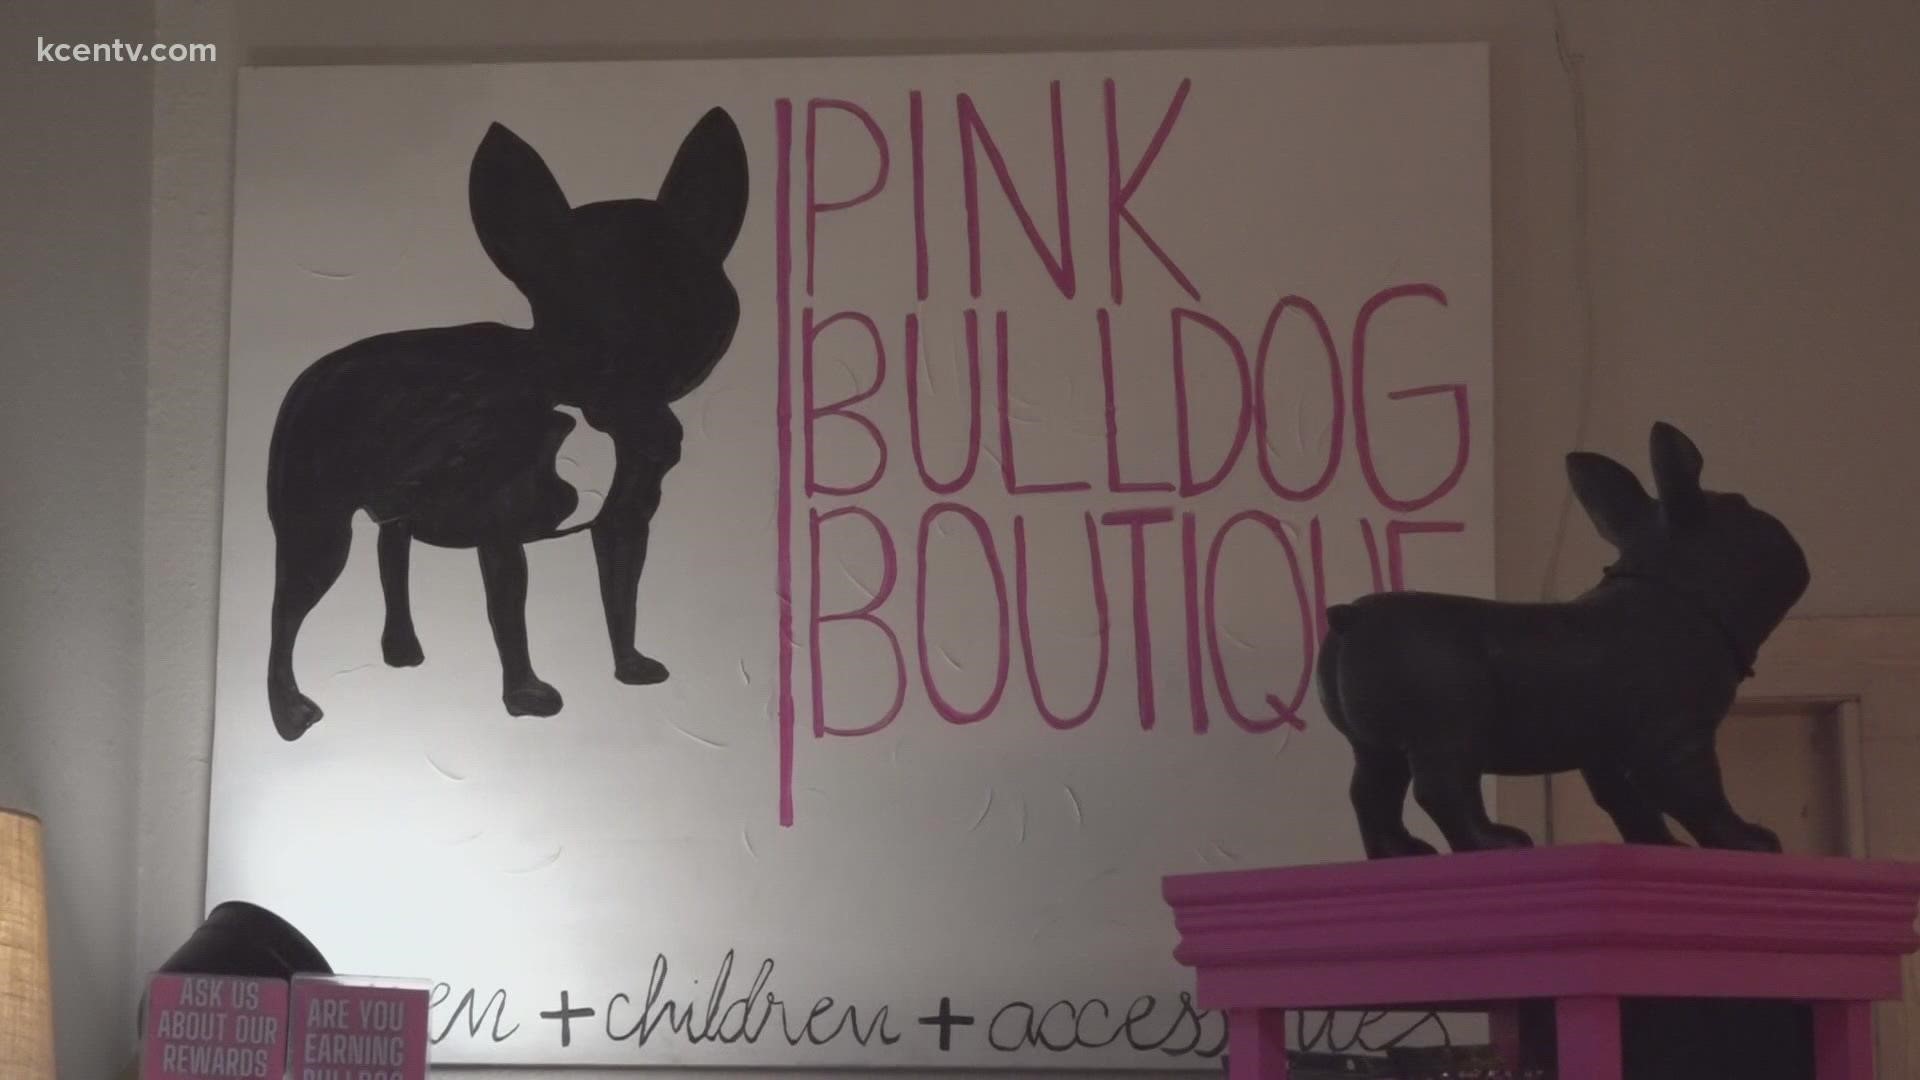 Pink BullDog Boutique and Up Nutrition have come together to raise money for the Ramirez family to cover financials for funeral and other costs.